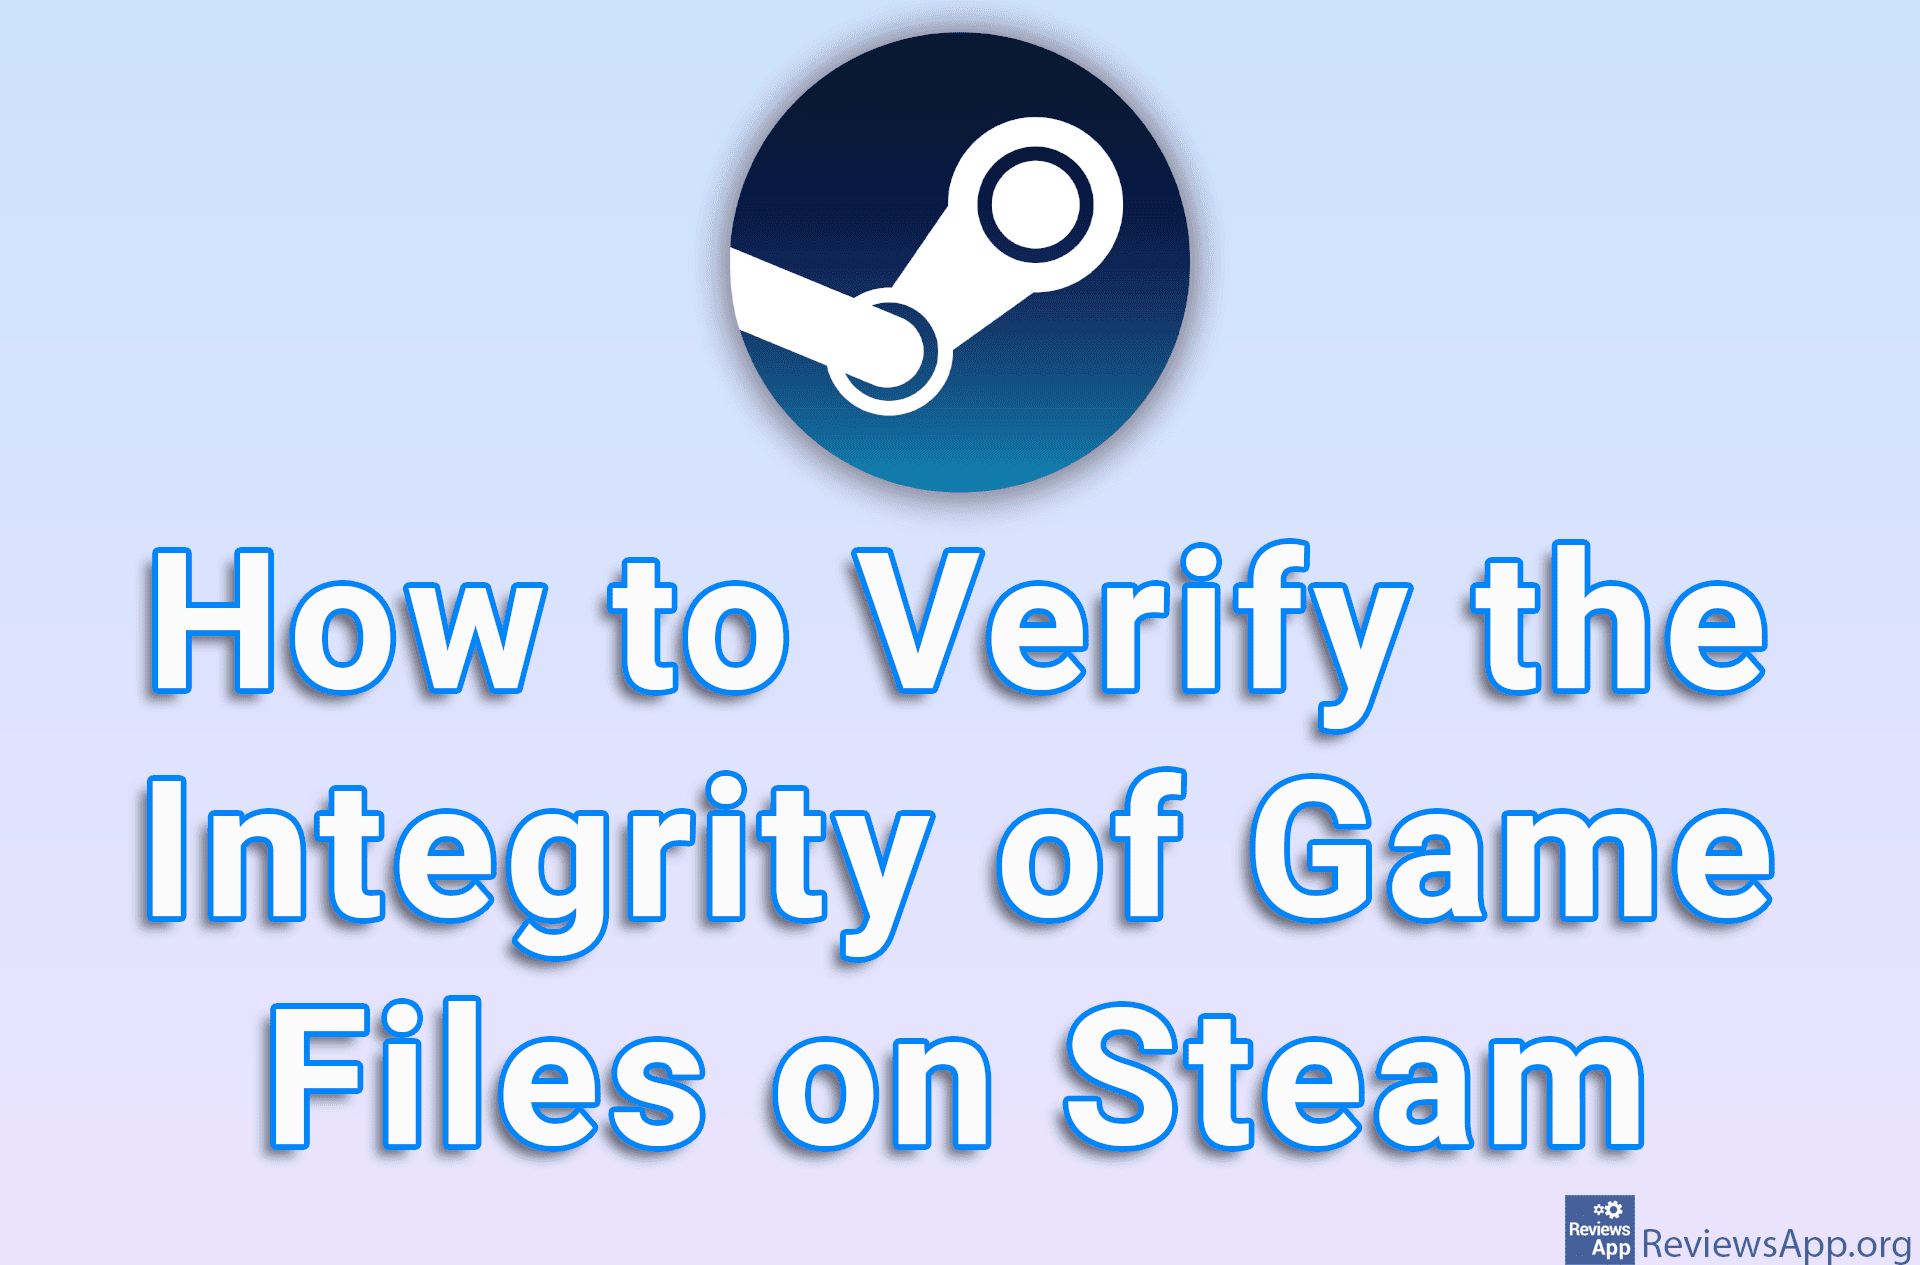 How to Verify the Integrity of Game Files on Steam